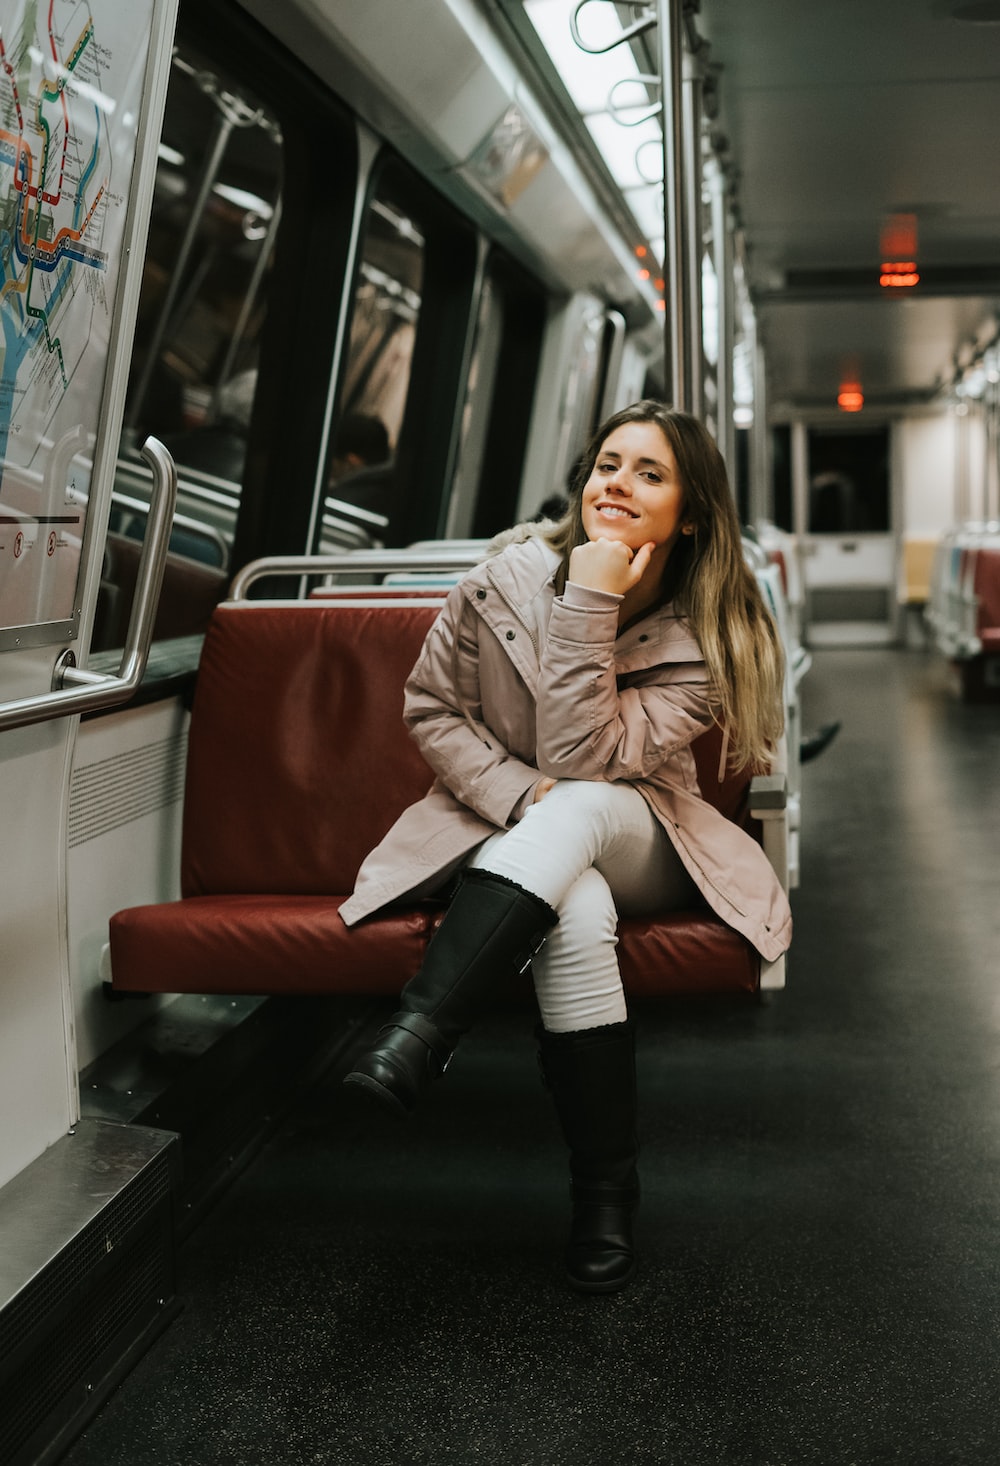 woman in coat sitting on train bench